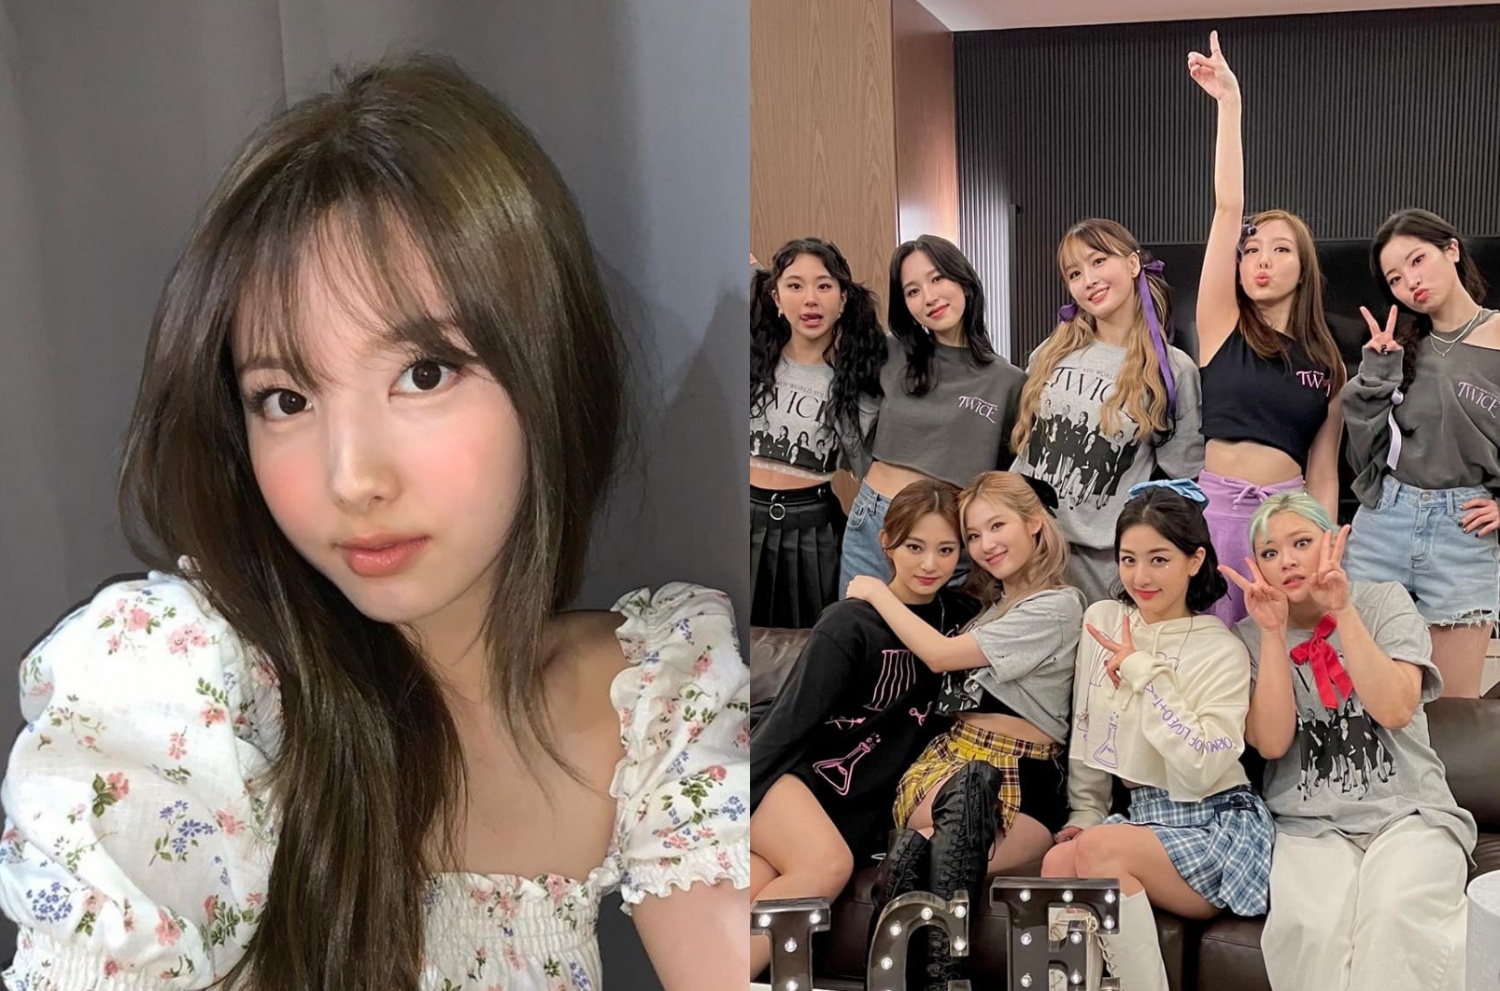 Pop' review: Twice member Nayeon's debut solo single is a positive